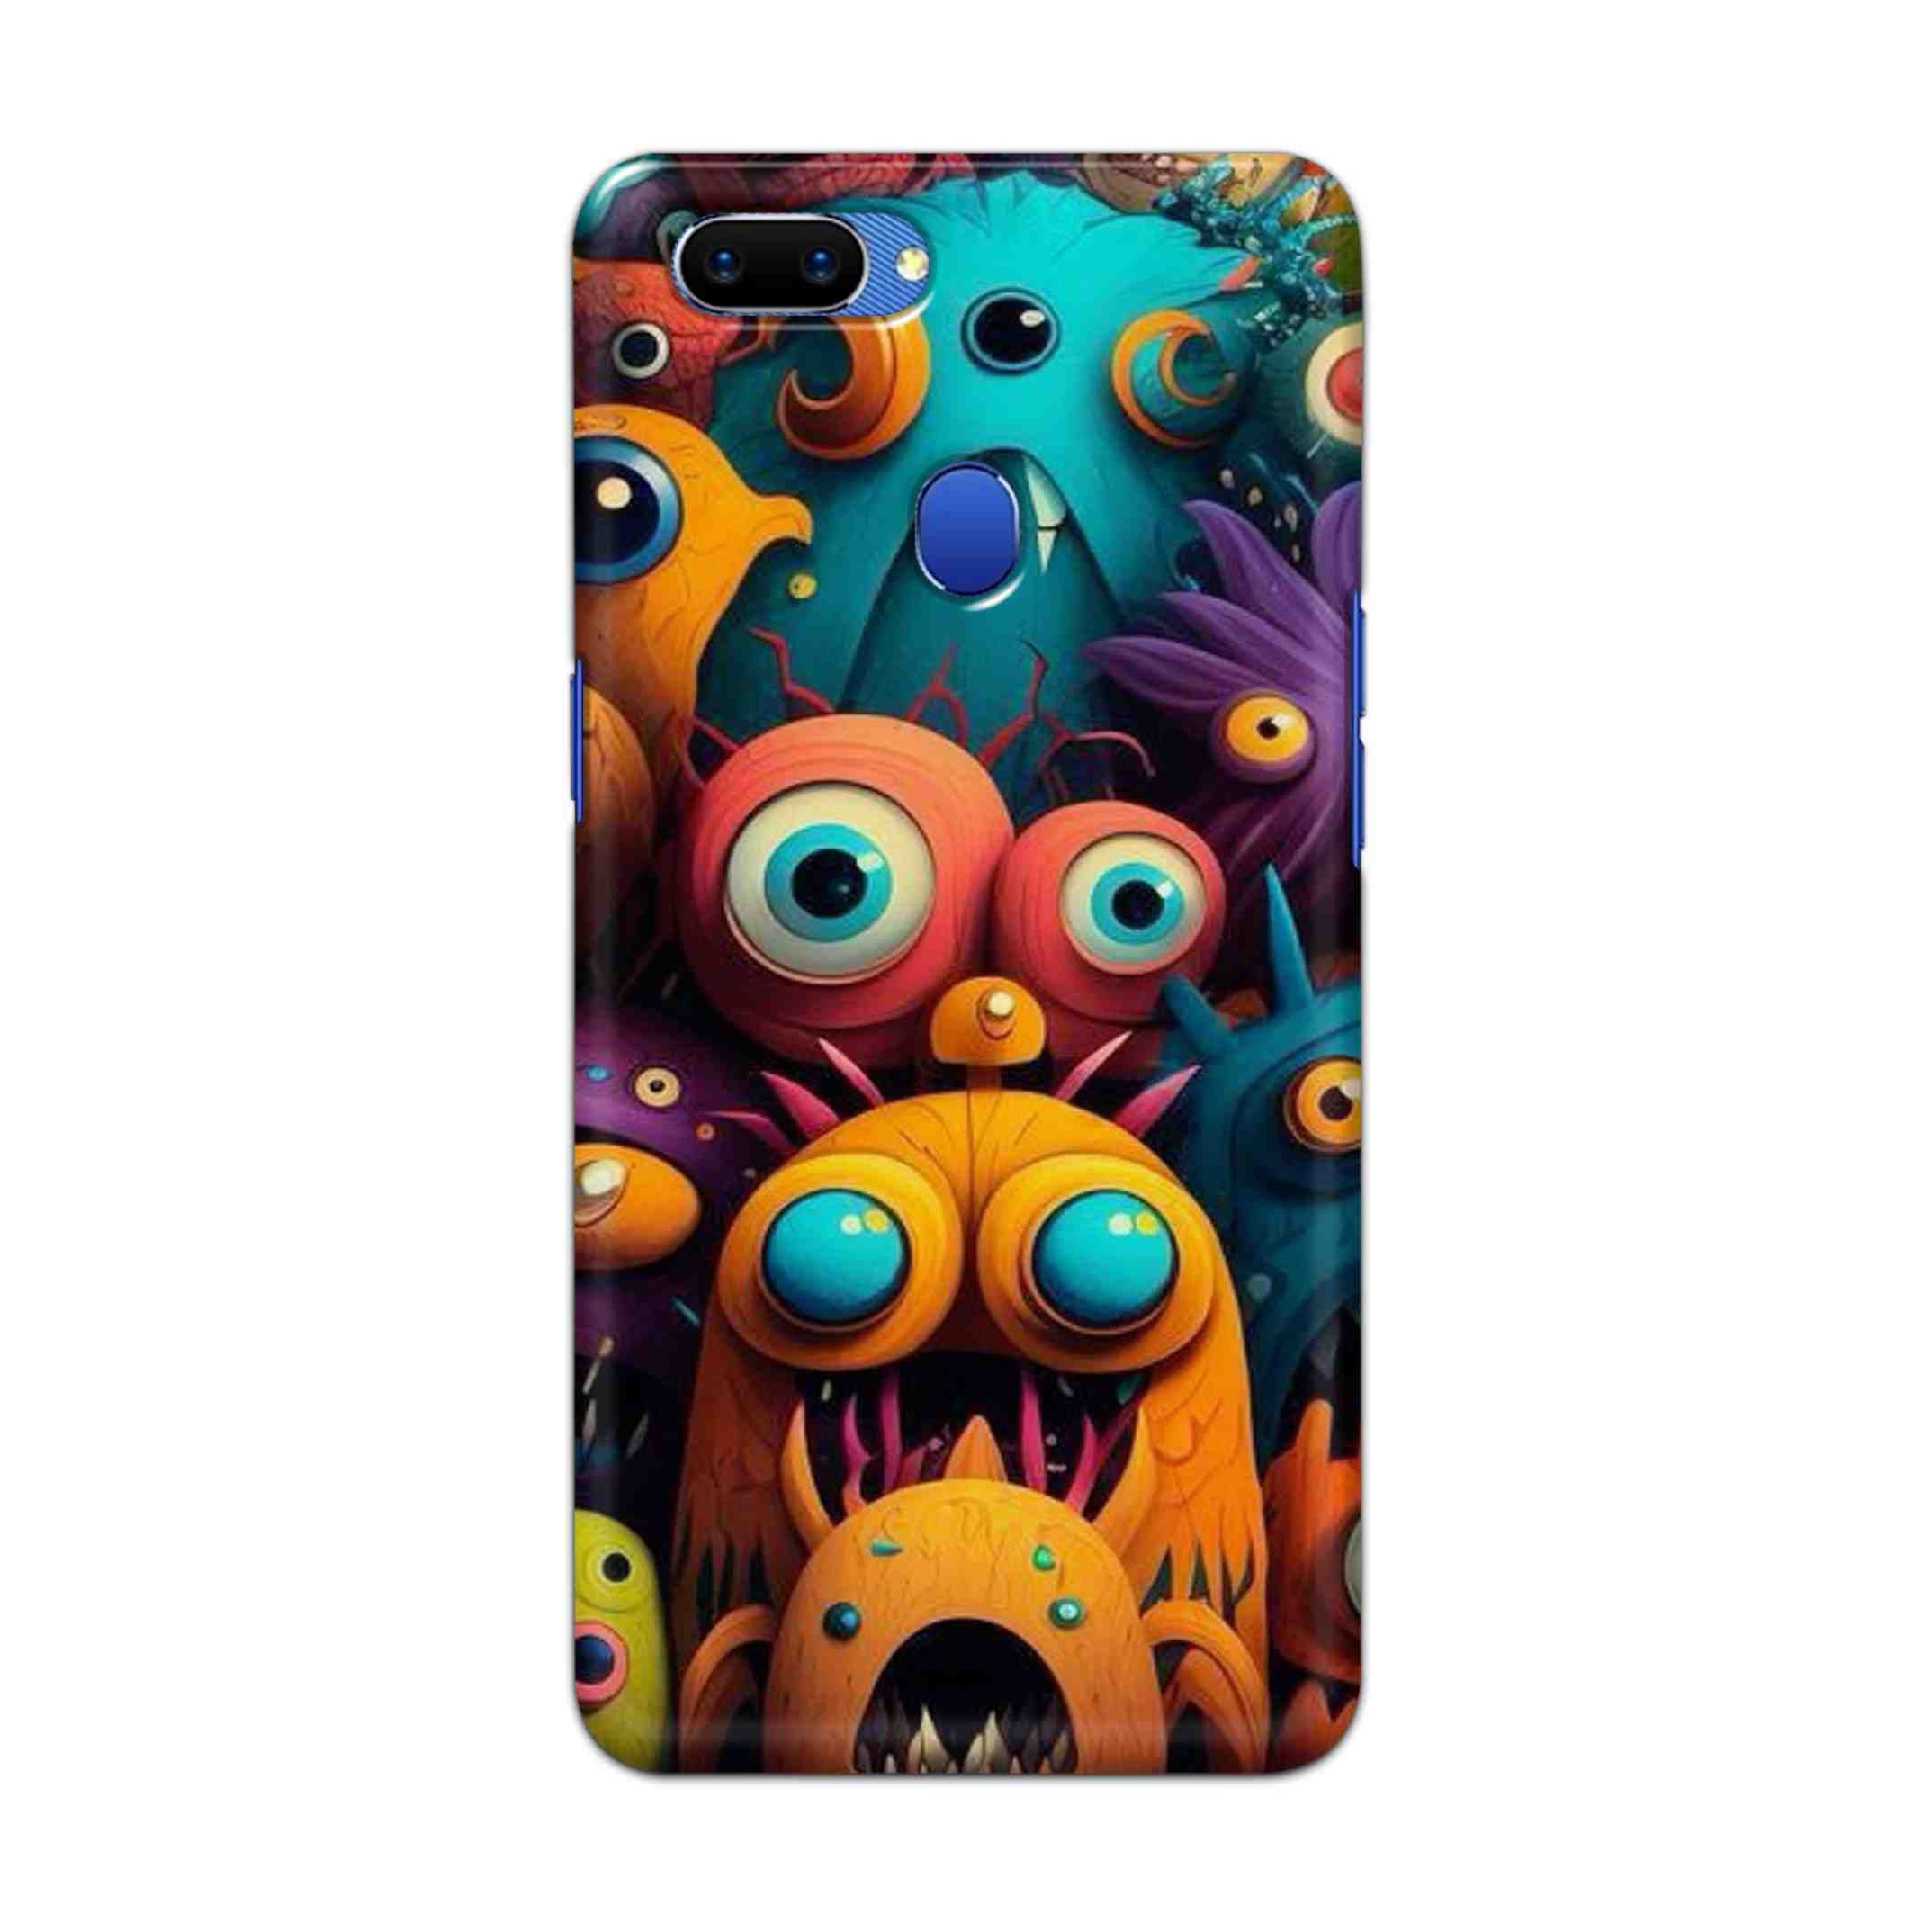 Buy Zombie Hard Back Mobile Phone Case Cover For Oppo A5 Online